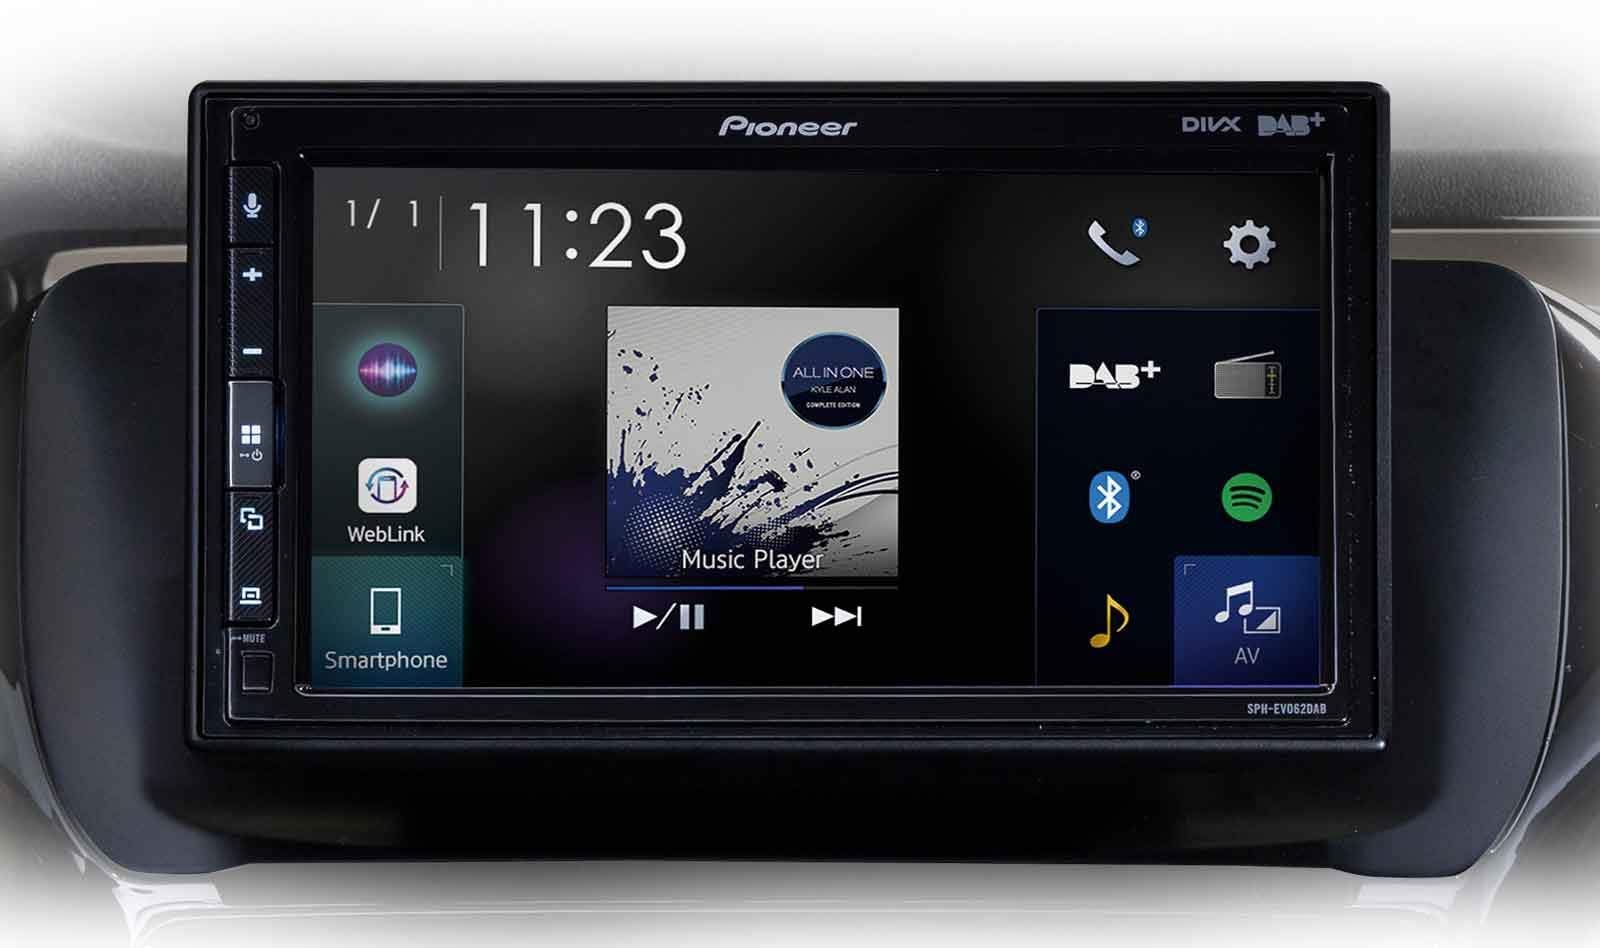 Pioneer SPH-EVO62DAB-208 Mediacenter für Peugeot 208/2008 – 6,8-Zoll Touchscreen, 1,5A Quick-Charging USB, Apple CarPlay, Android Auto, DAB/DAB+ Digitalradio, Bluetooth, 13-Band-Equalizer von Pioneer